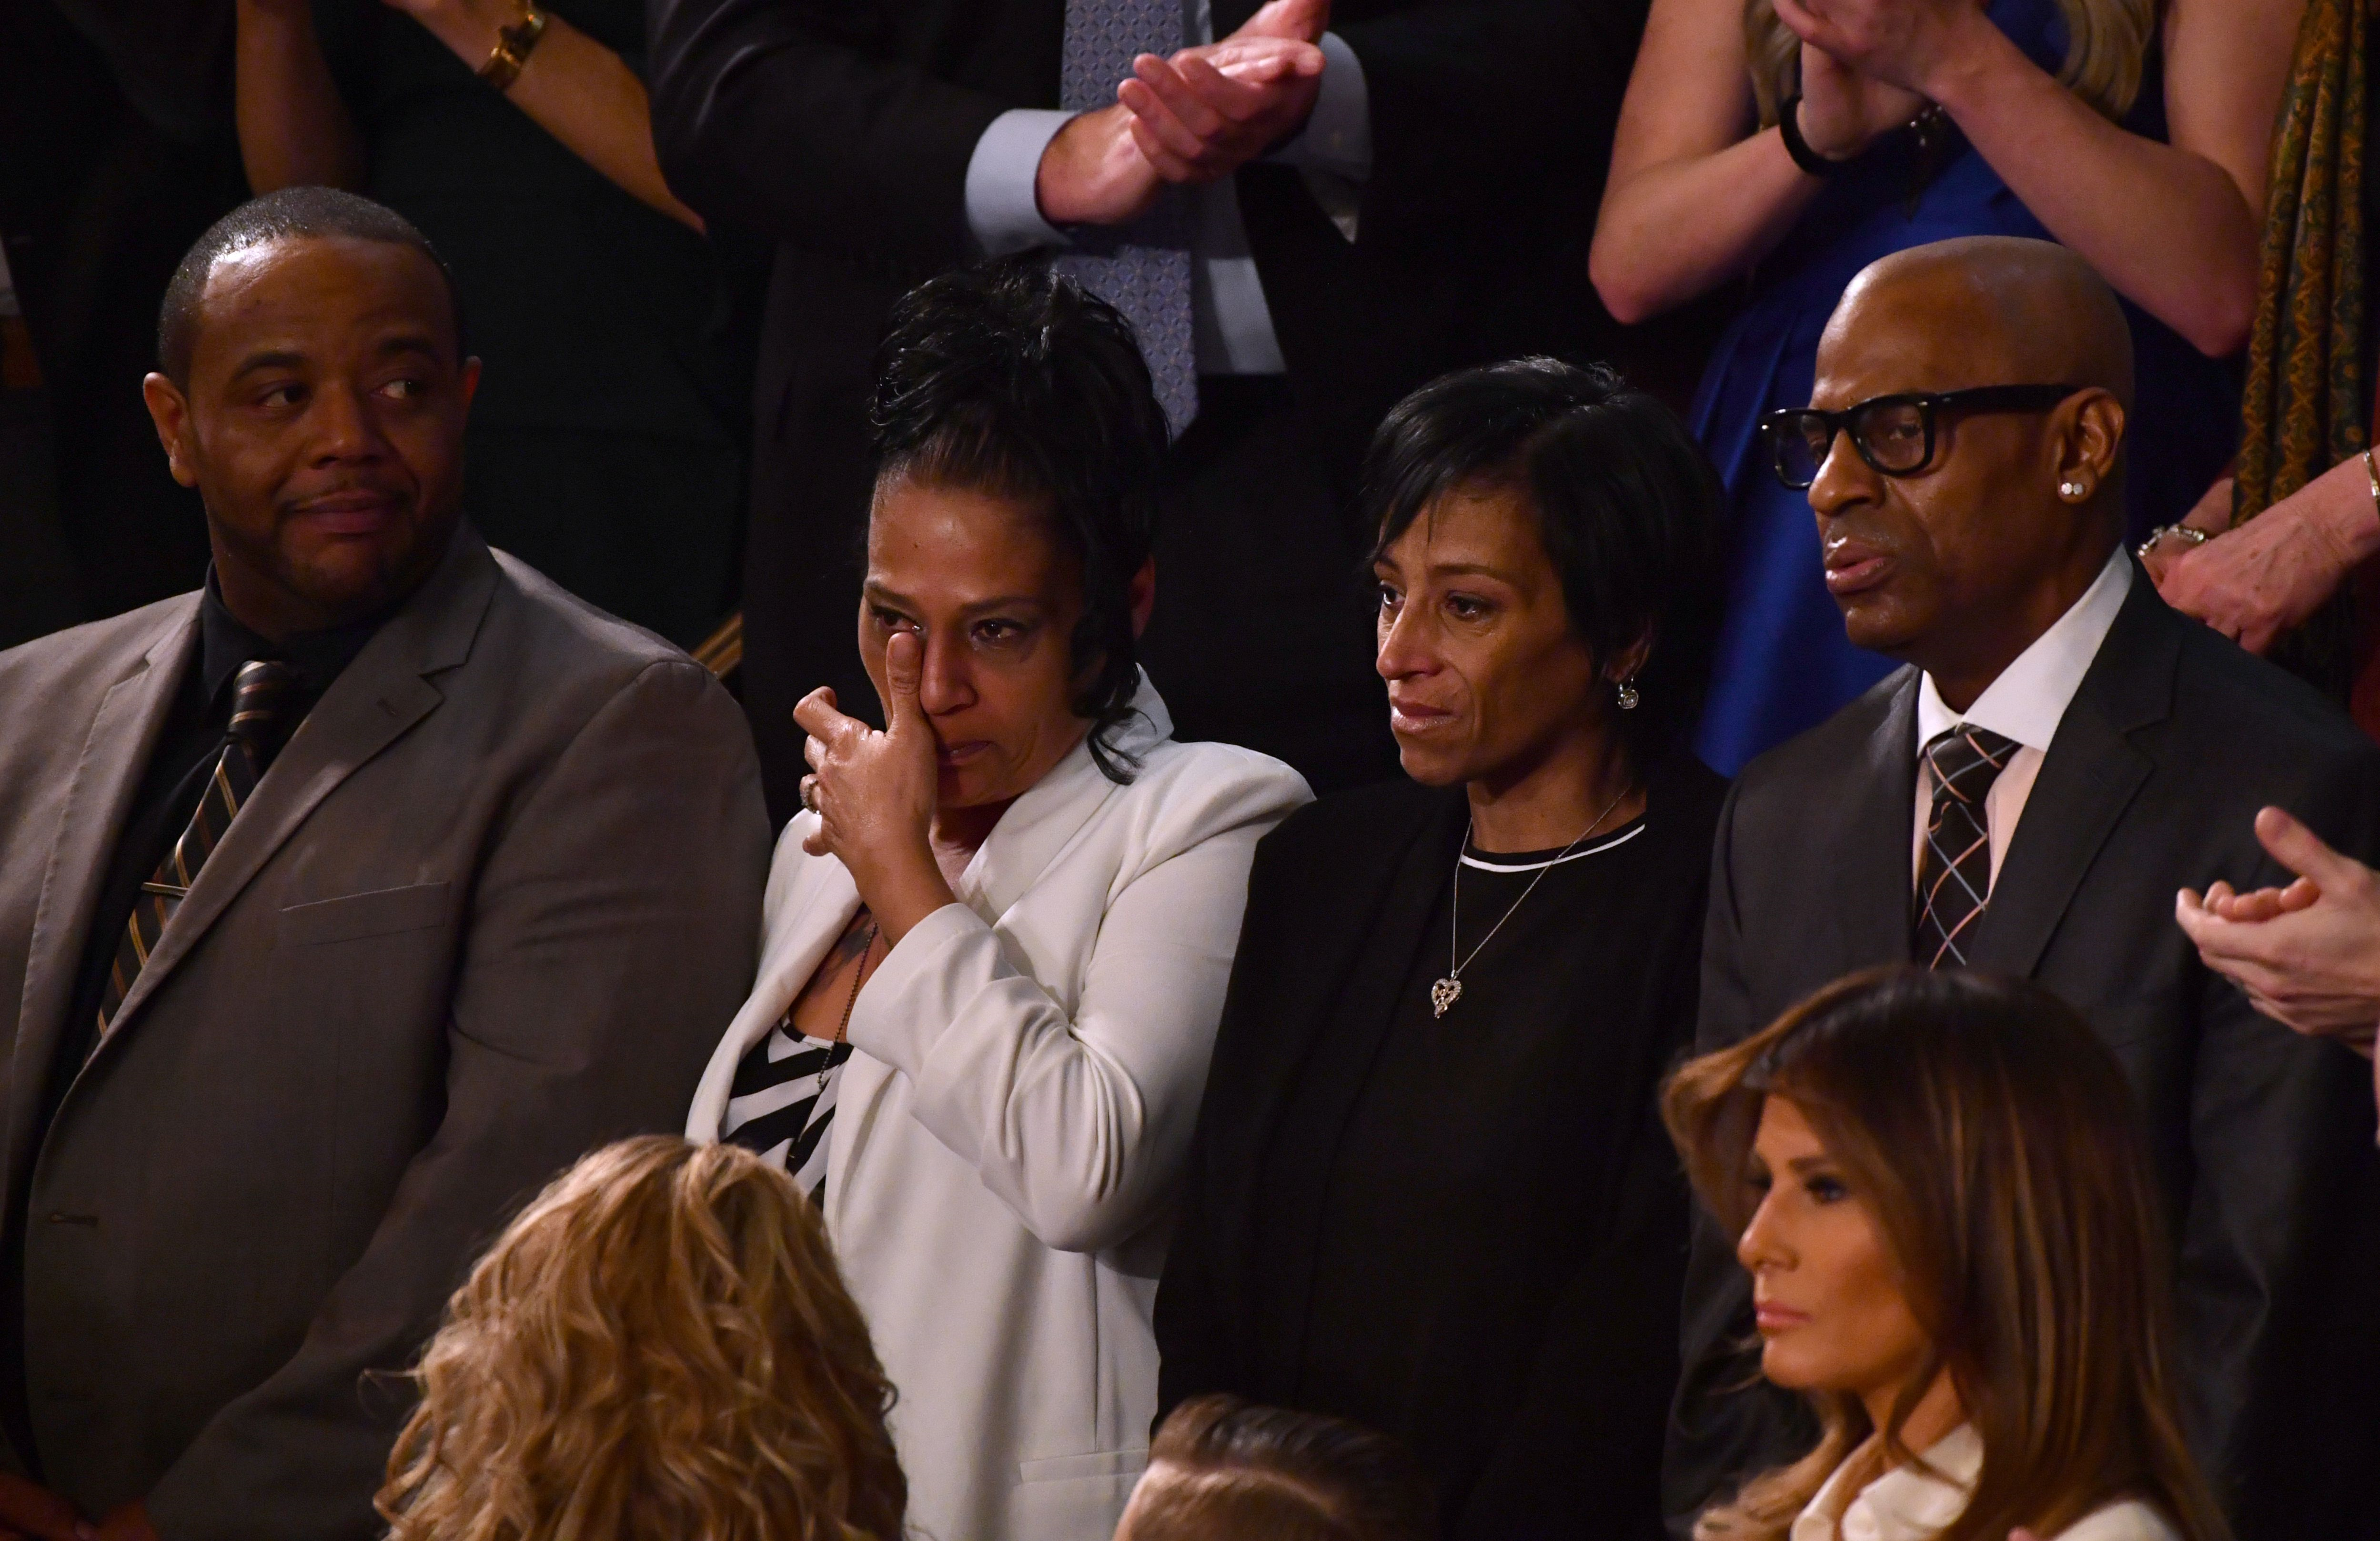 Parents Of MS-13 Victims Recognized During SOTU